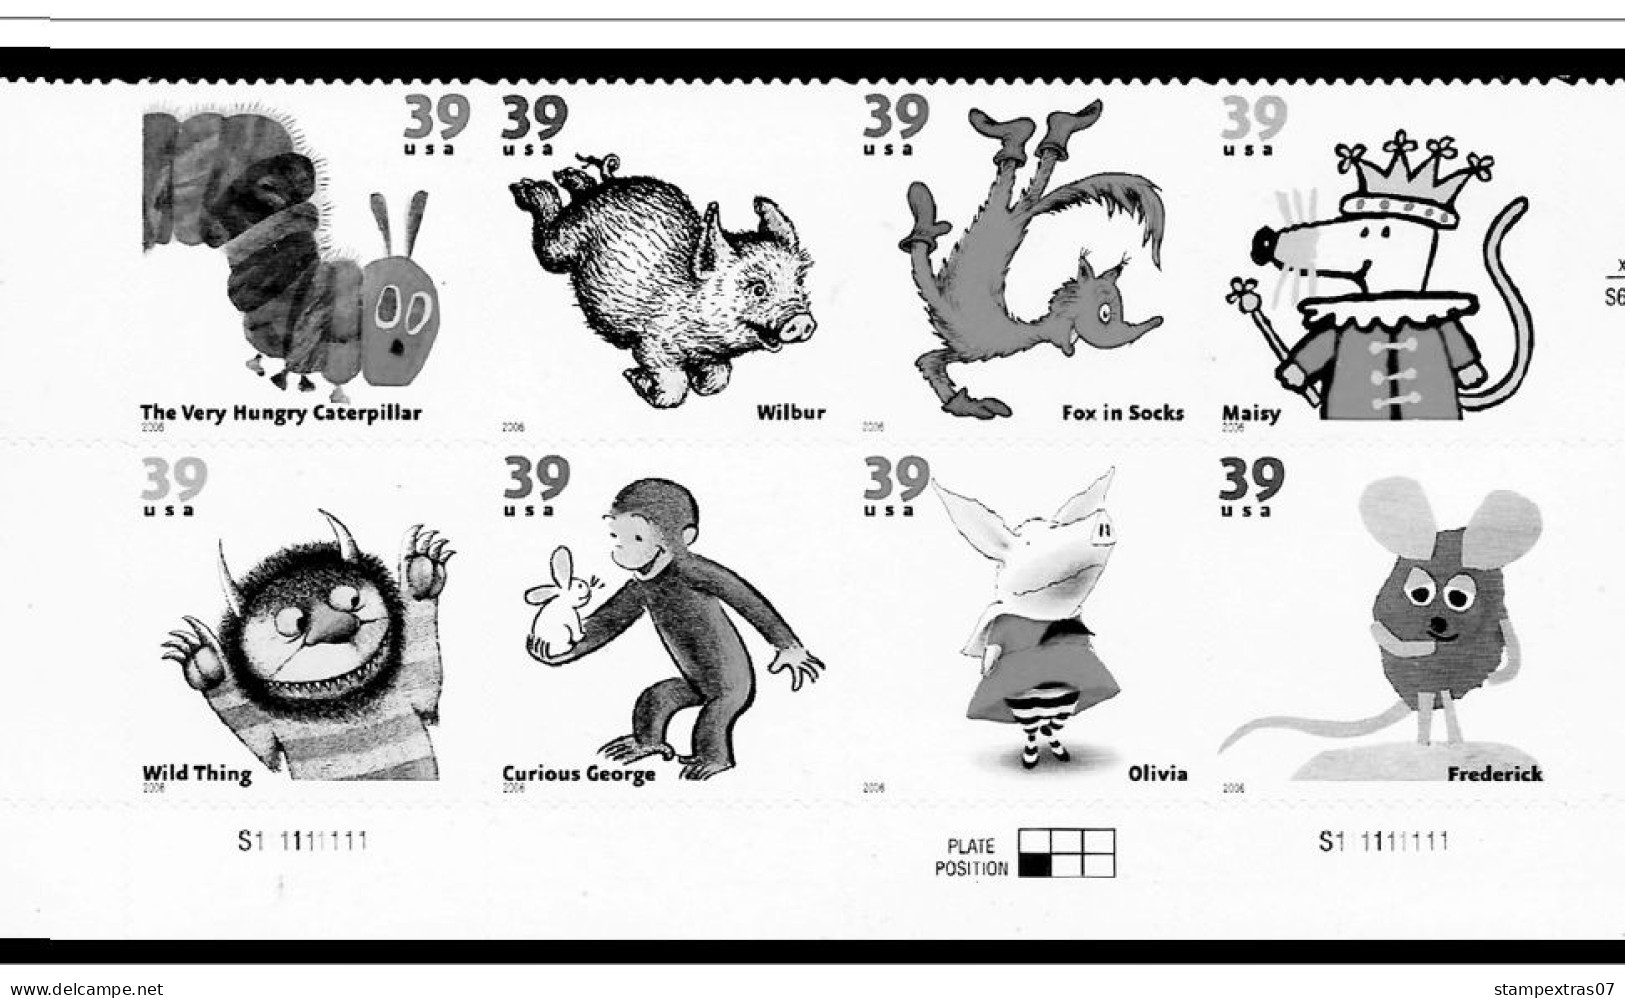 US 2006-2010 PLATE BLOCKS STAMP ALBUM PAGES (51 B&w Illustrated Pages) - Englisch